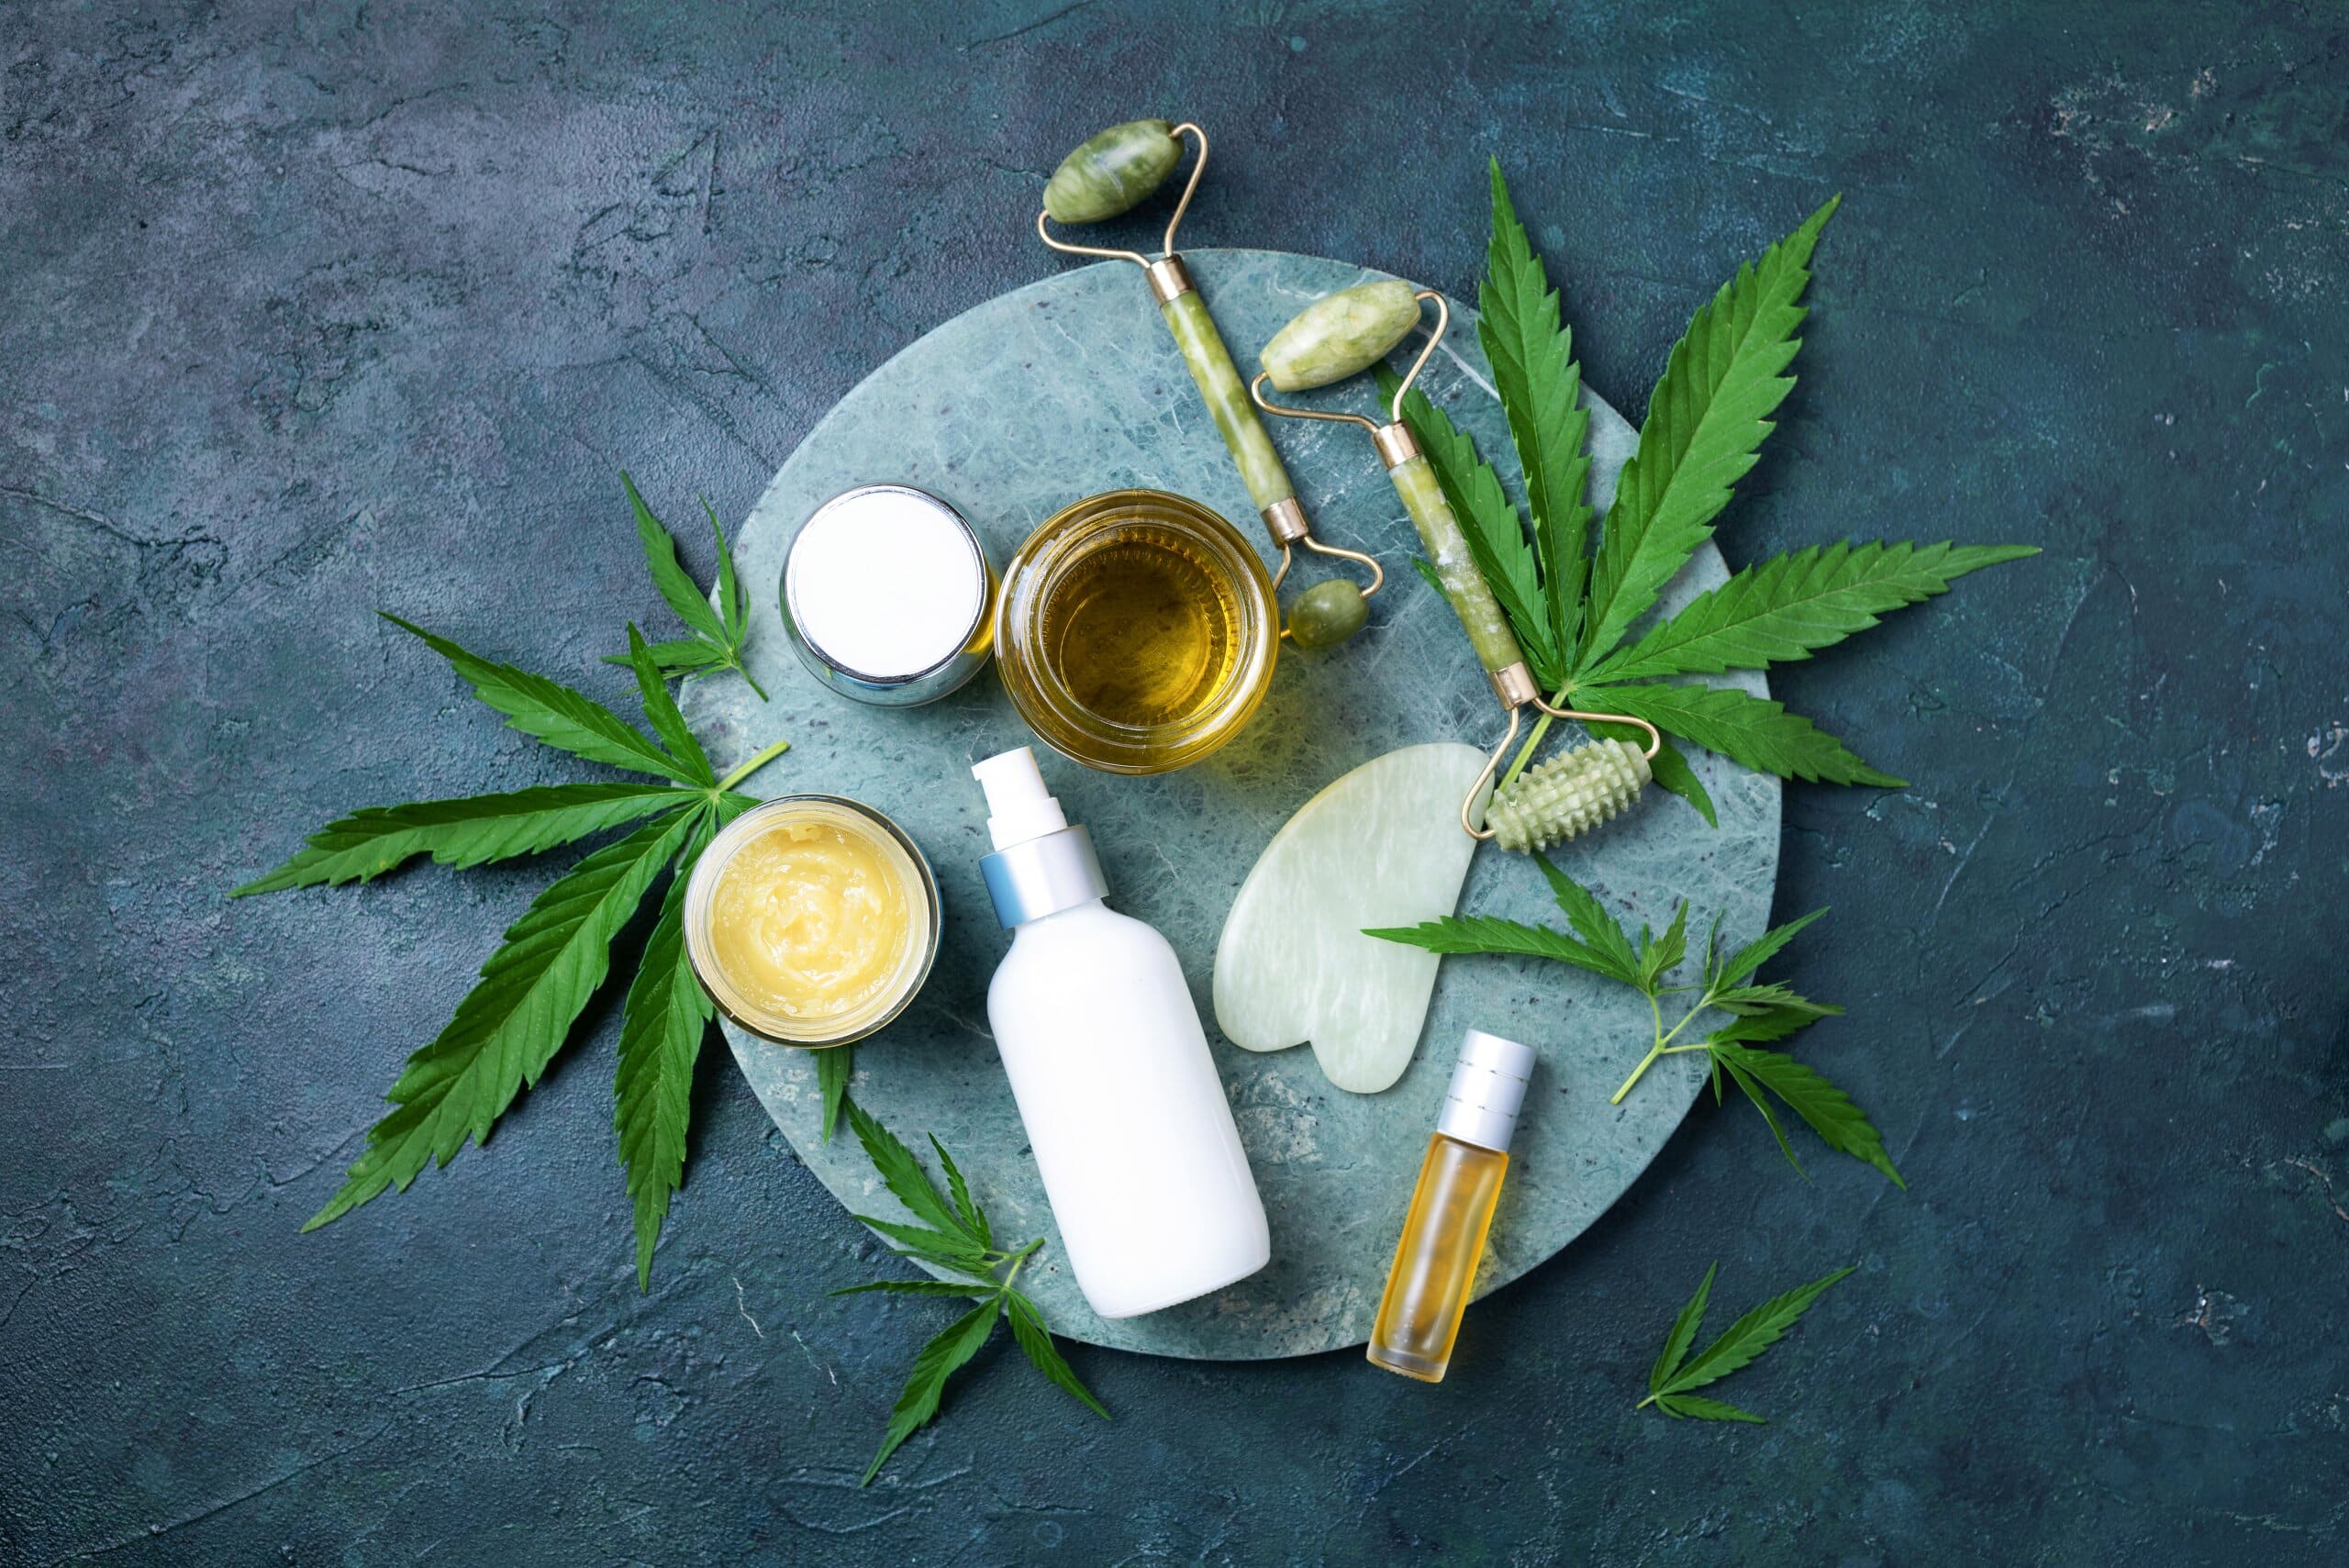 Hemp leaves and various creams, lotions and jade face roller on a circle tray.